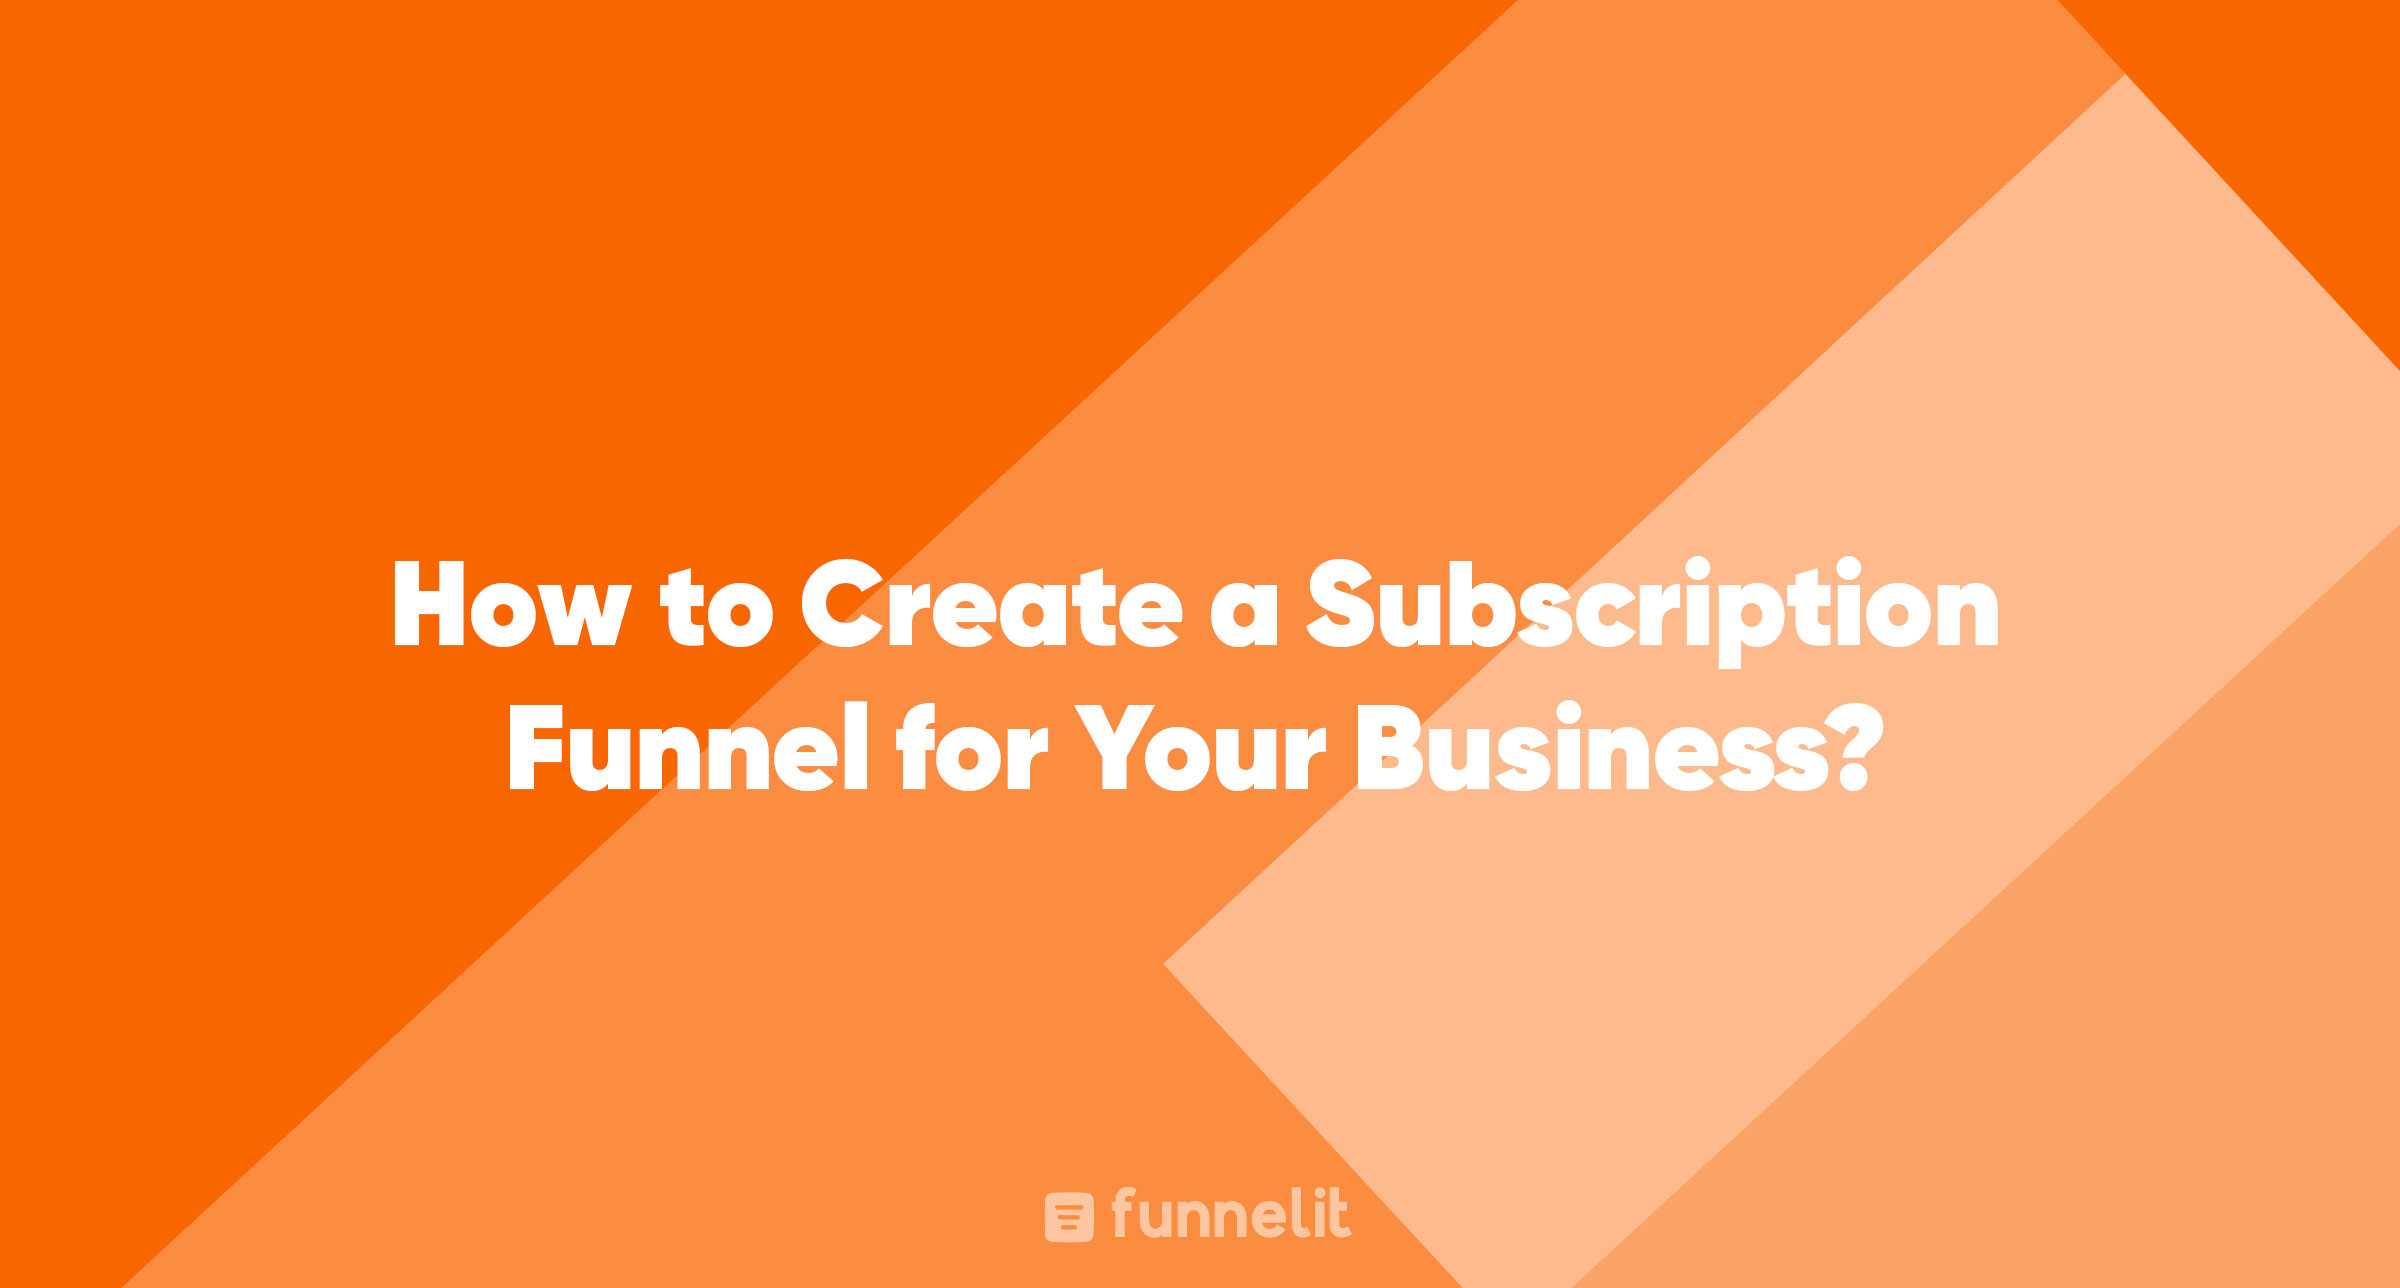 Article | How to Create a Subscription Funnel for Your Business?